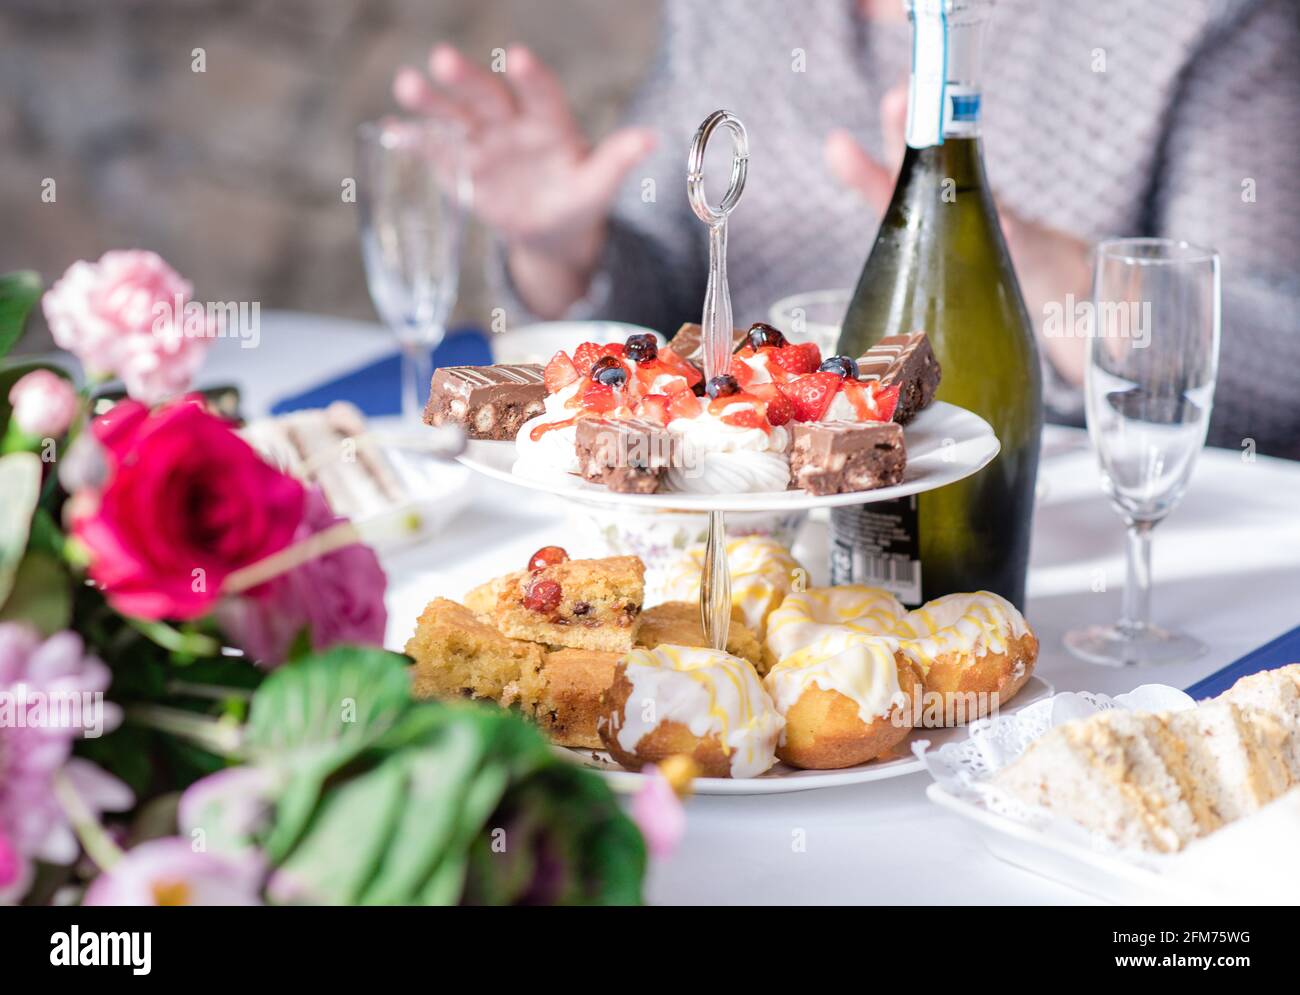 Afternoon tea buffet on cake stand with wine and scones Stock Photo